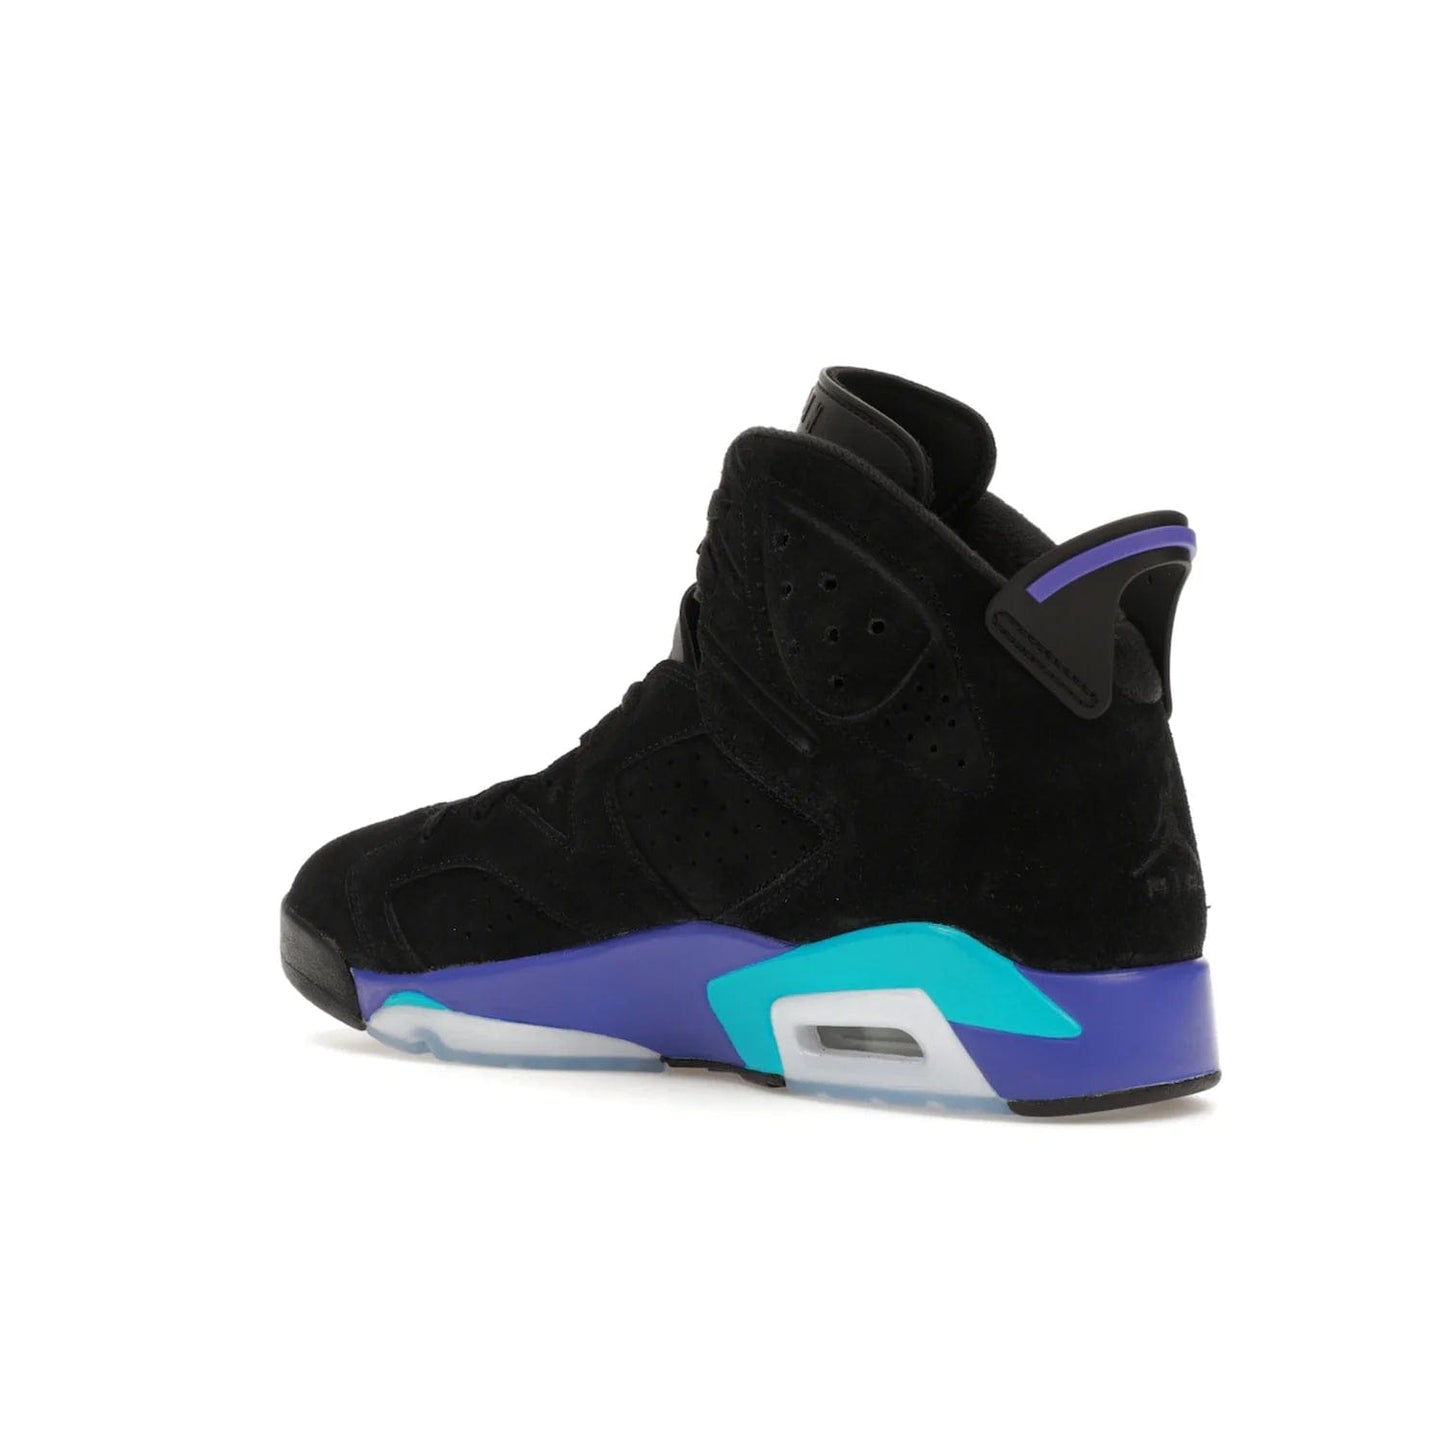 Jordan 6 Retro Aqua - Image 23 - Only at www.BallersClubKickz.com - Feel the classic Jordan 6 Retro Aqua paired with modern style. Black, Bright Concord, and Aquatone hues are crafted with a supple suede and rubberized heel tab. This standout sneaker adds signature Jordan elements at $200. Elevate your style with the Jordan 6 Retro Aqua.